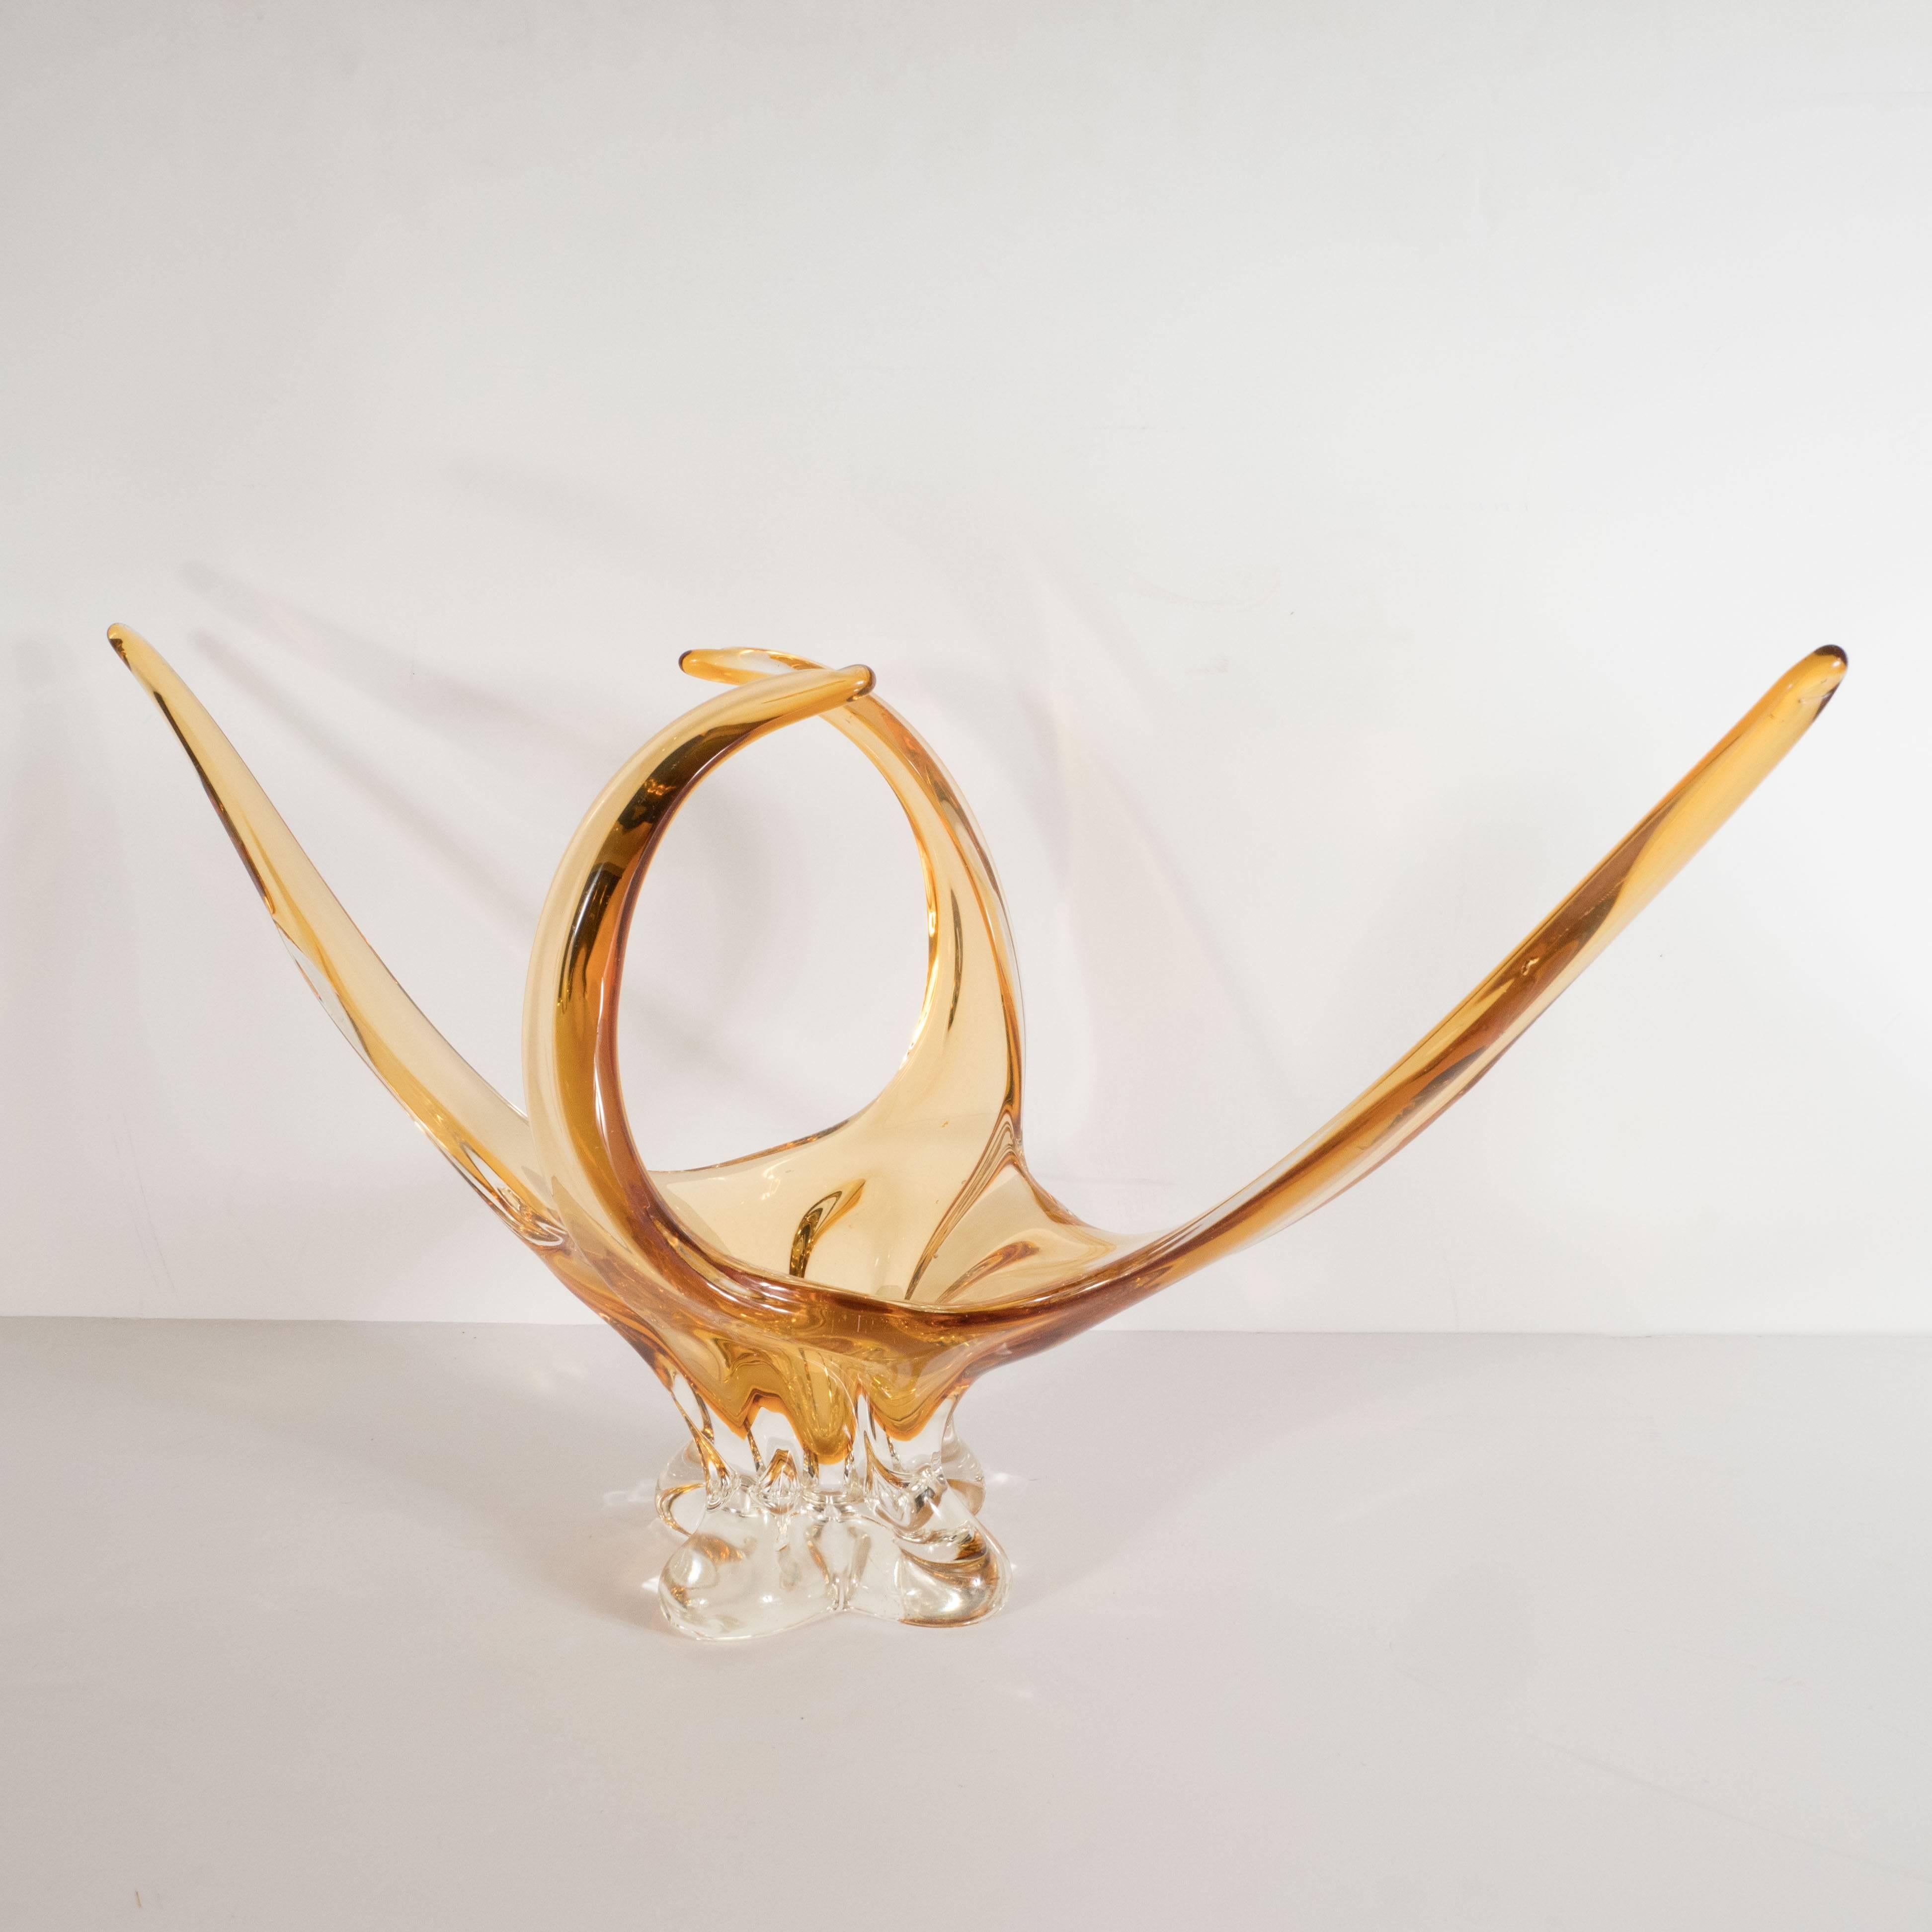 This stunning and graphic dish was handblown in Murano, Italy the islands off the coast of Venice renowned for centuries for their superlative glass production. This piece features four glass tendrils reaching skyward seemingly frozen in the midst